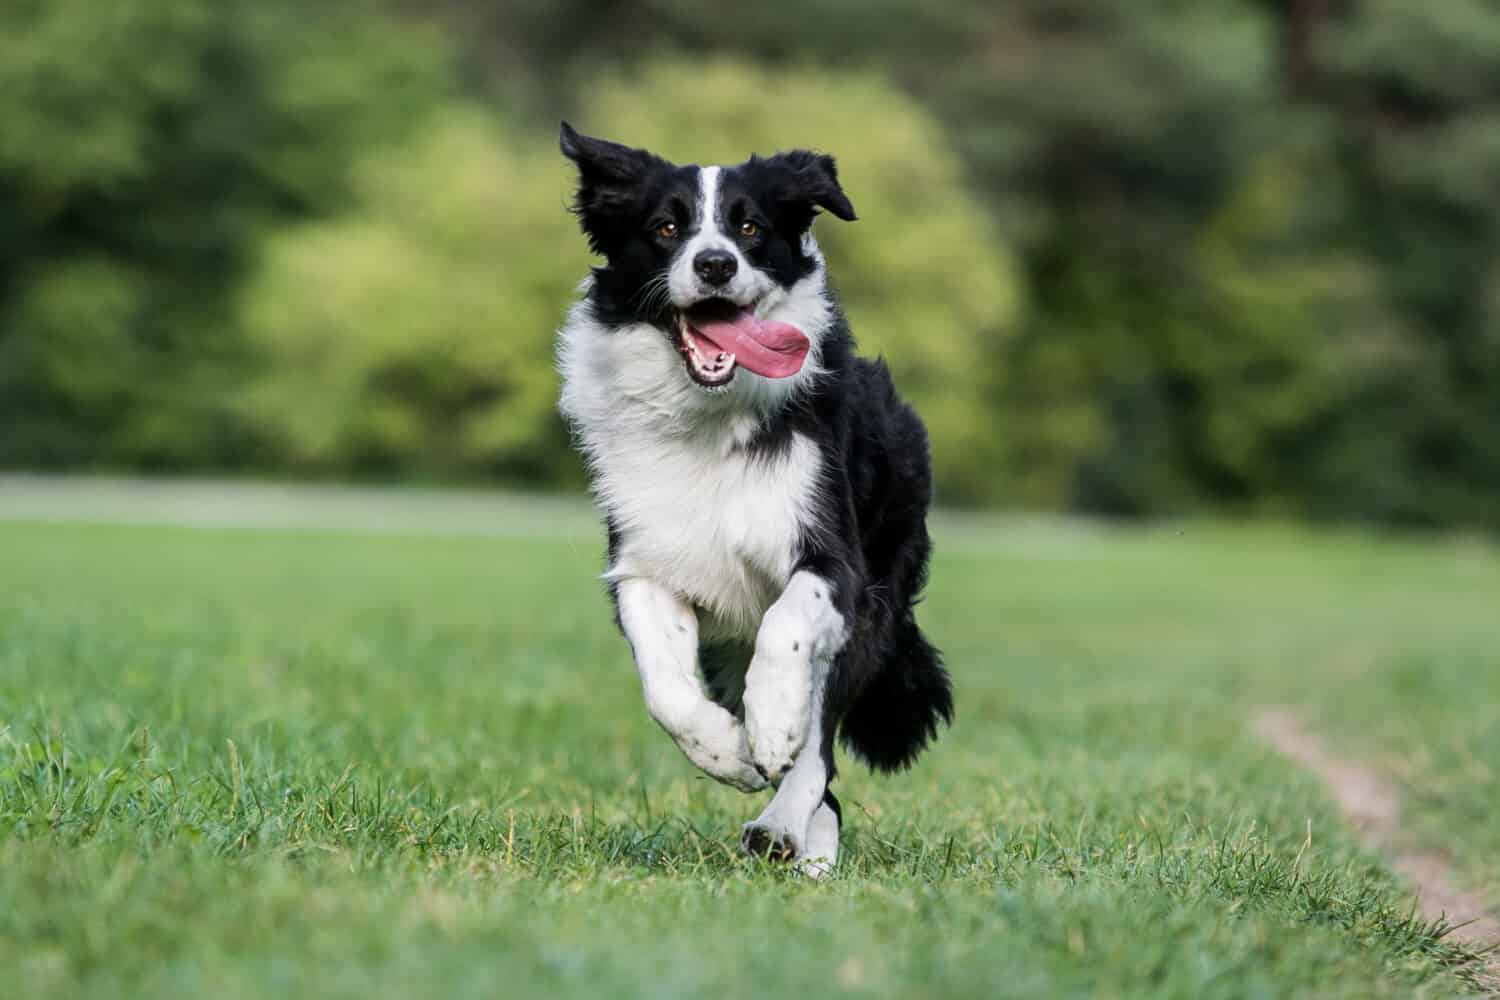 Smart black and white border collie running on the green grass playing fetch.